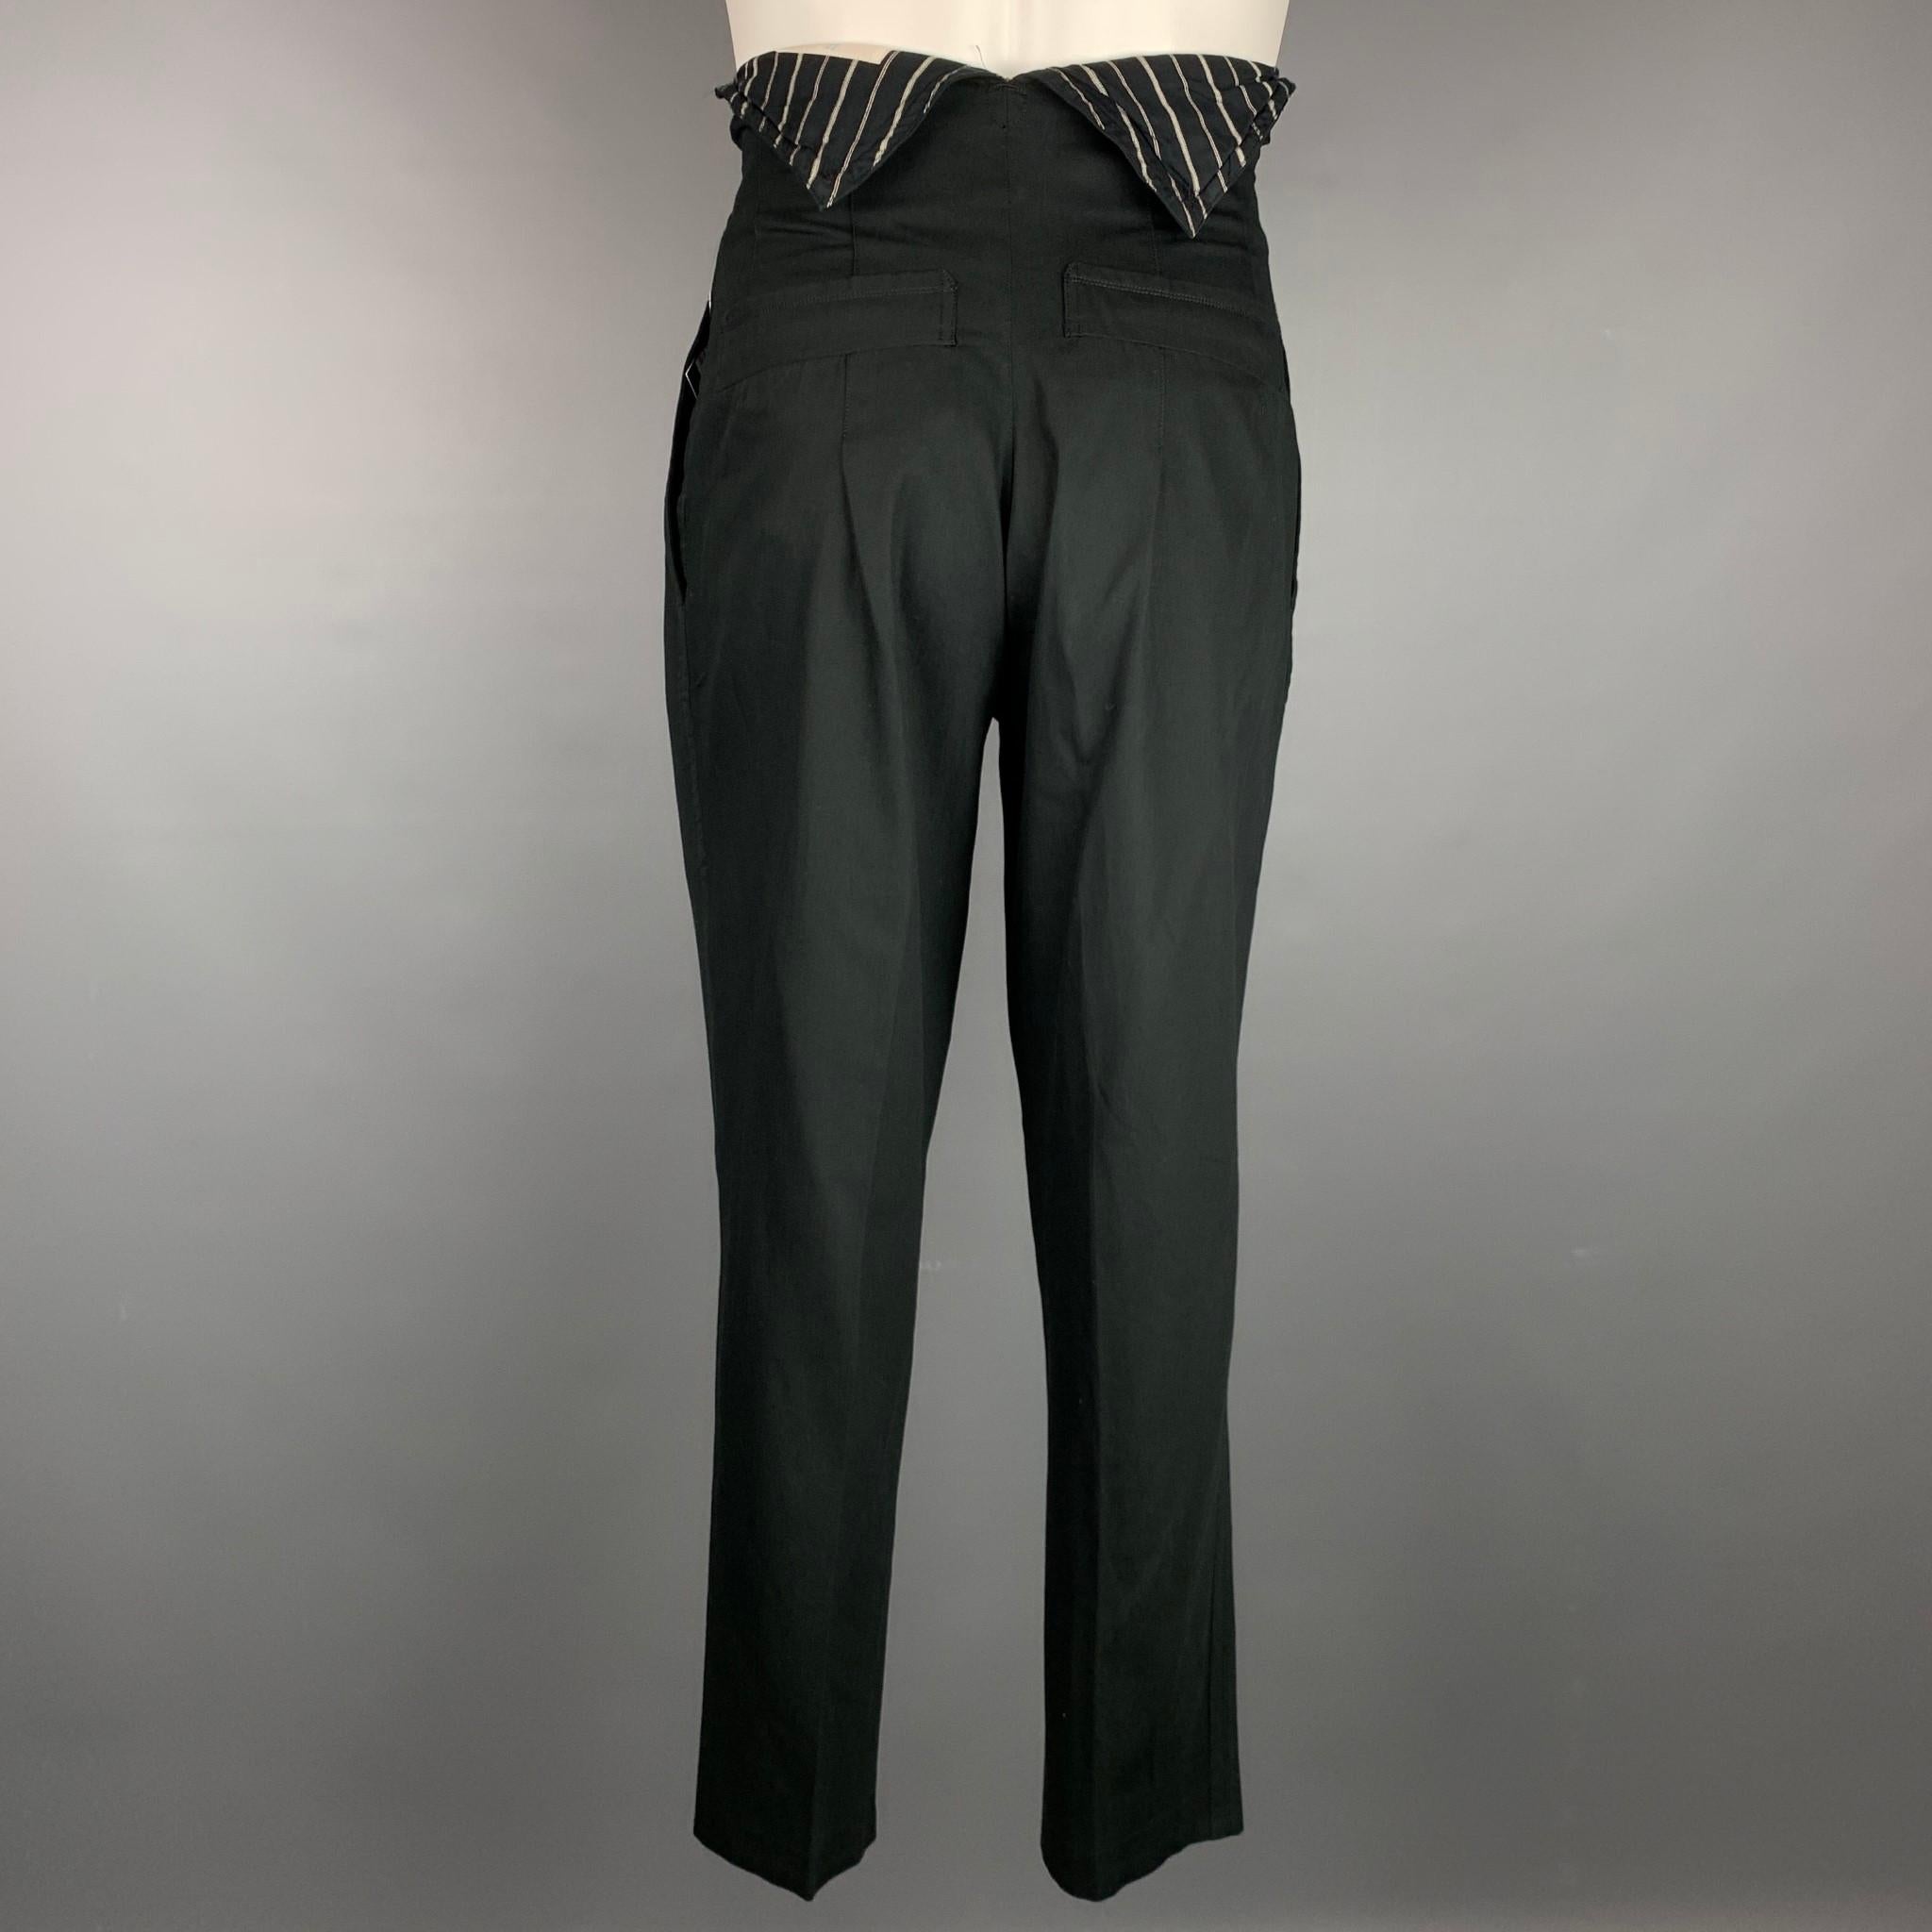 Vintage MATSUDA dress pants comes in a black wool blend featuring a high waisted style, pleated, slit pockets, and a zip fly closure. Made in Japan.

Good Pre-Owned Condition.
Marked: No size marked

Measurements:

Waist: 30 in.
Rise: 13.5